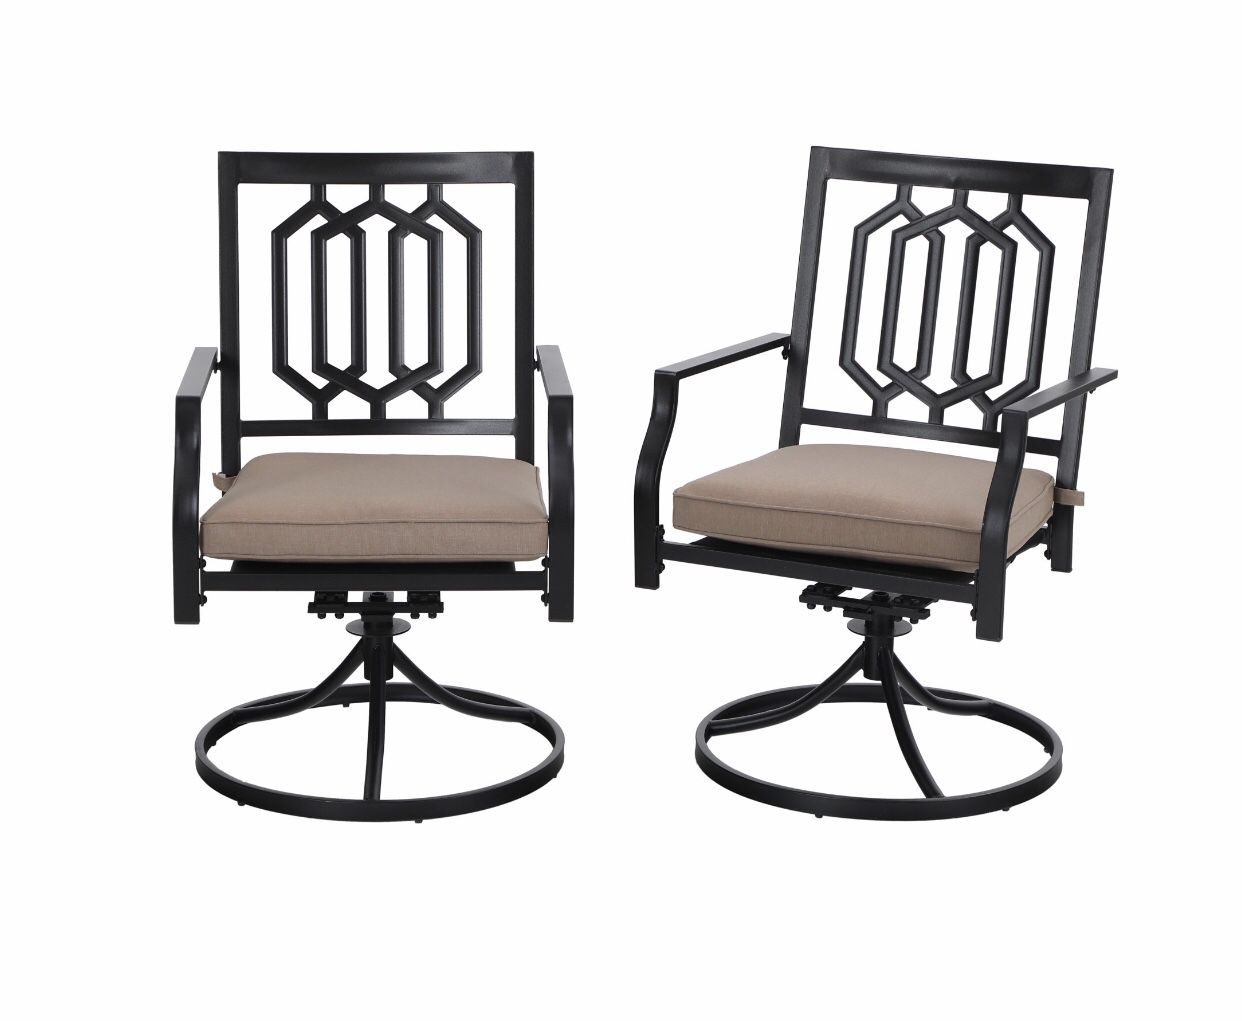 MF Studio Outdoor Metal Swivel Chairs Set of 2 Patio Dining Rocker Chair with Cushion Furniture Set Support 300 lbs for Garden Backyard Bistro